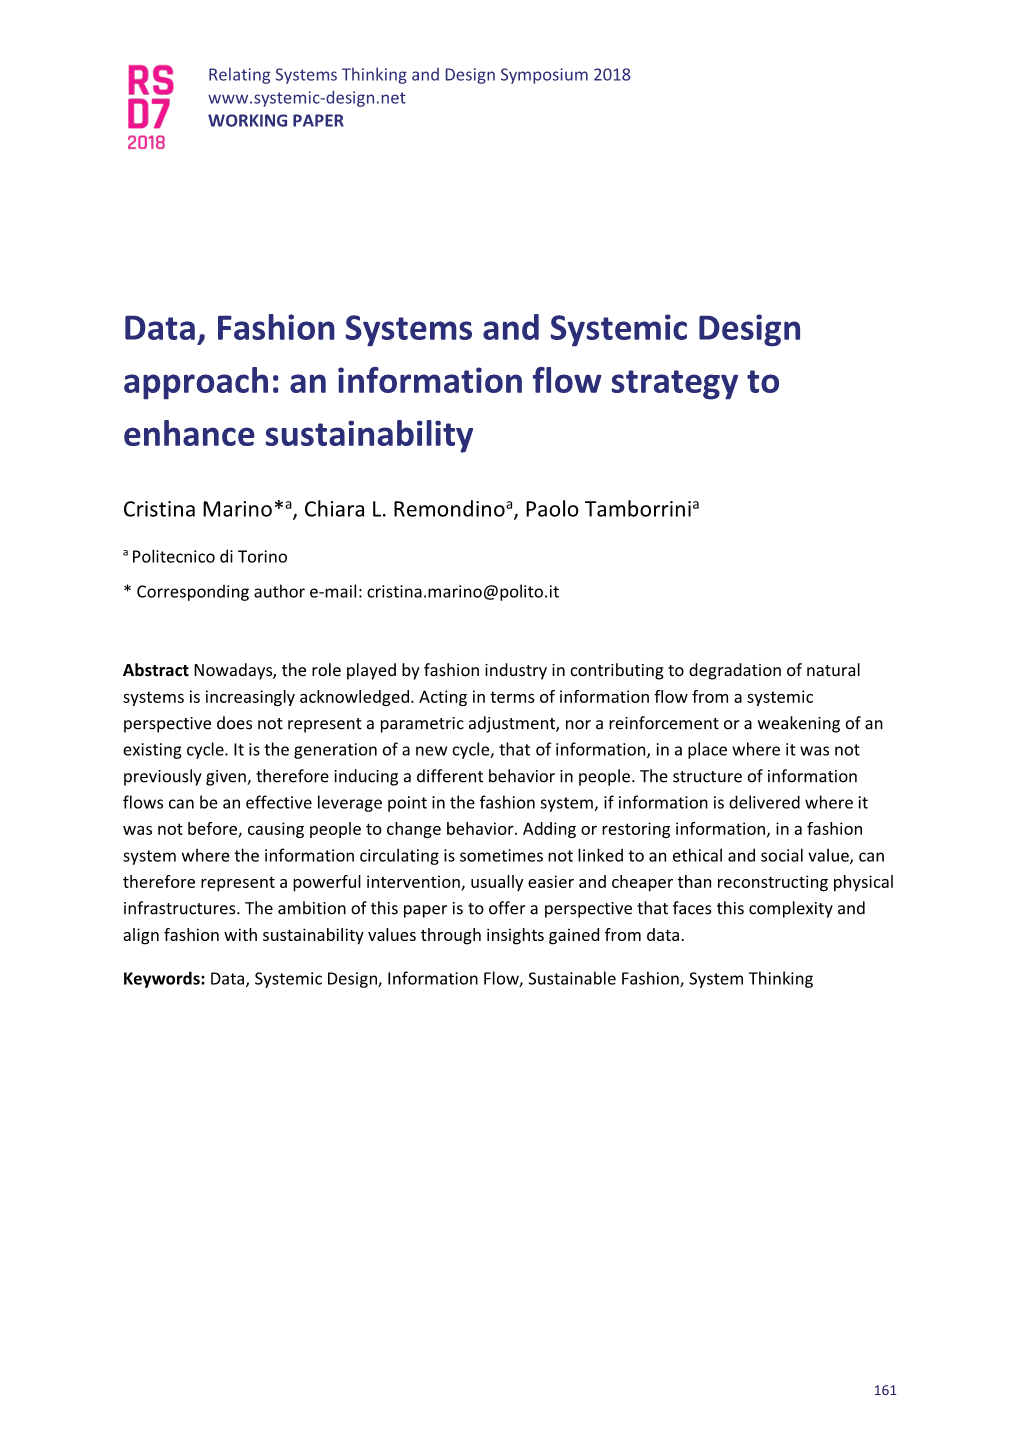 Data, Fashion System and Systemic Design Approach: an Information